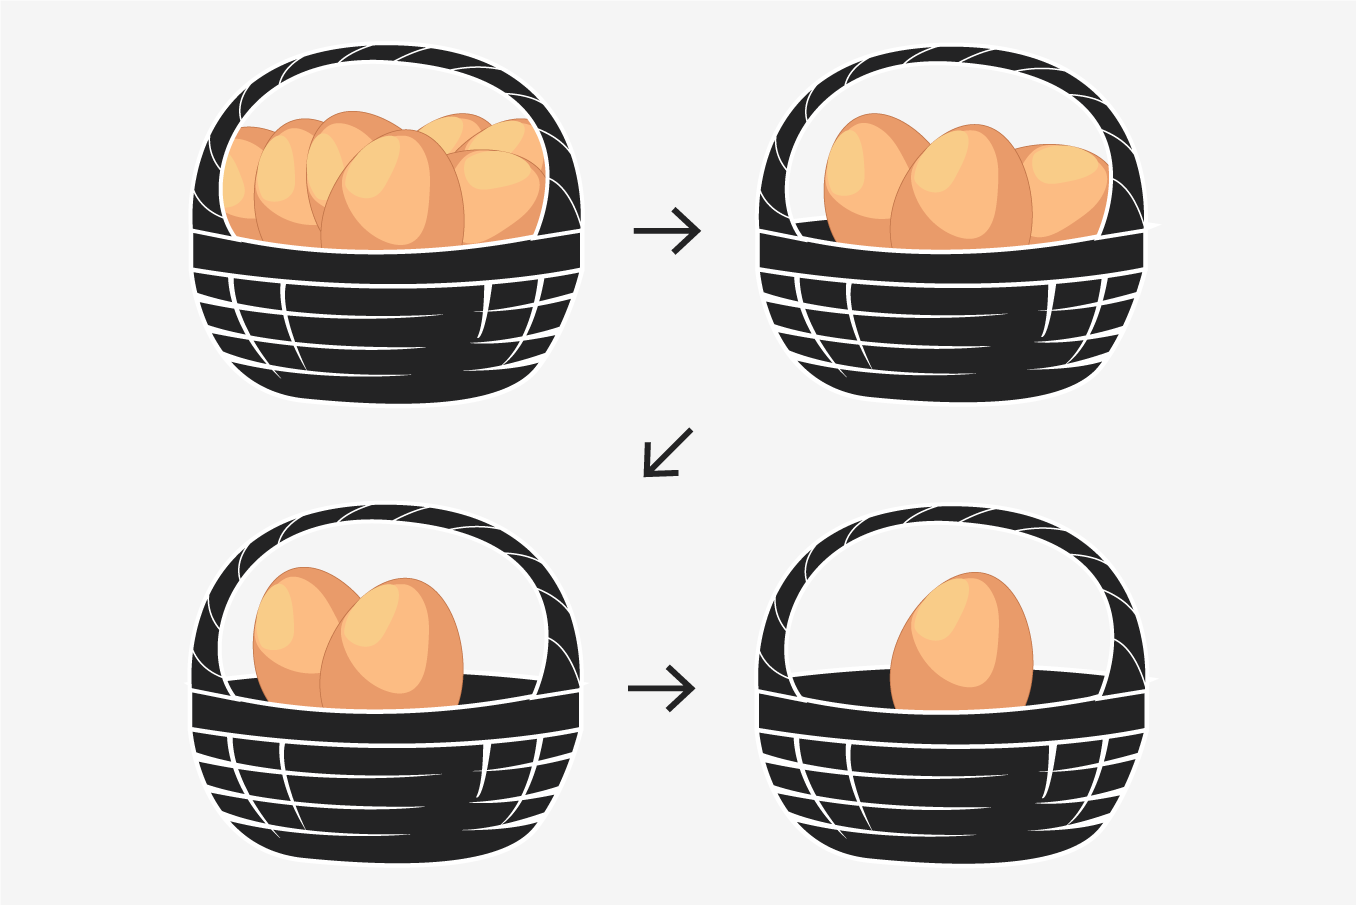 Graphic showing decreased egg production in chickens.